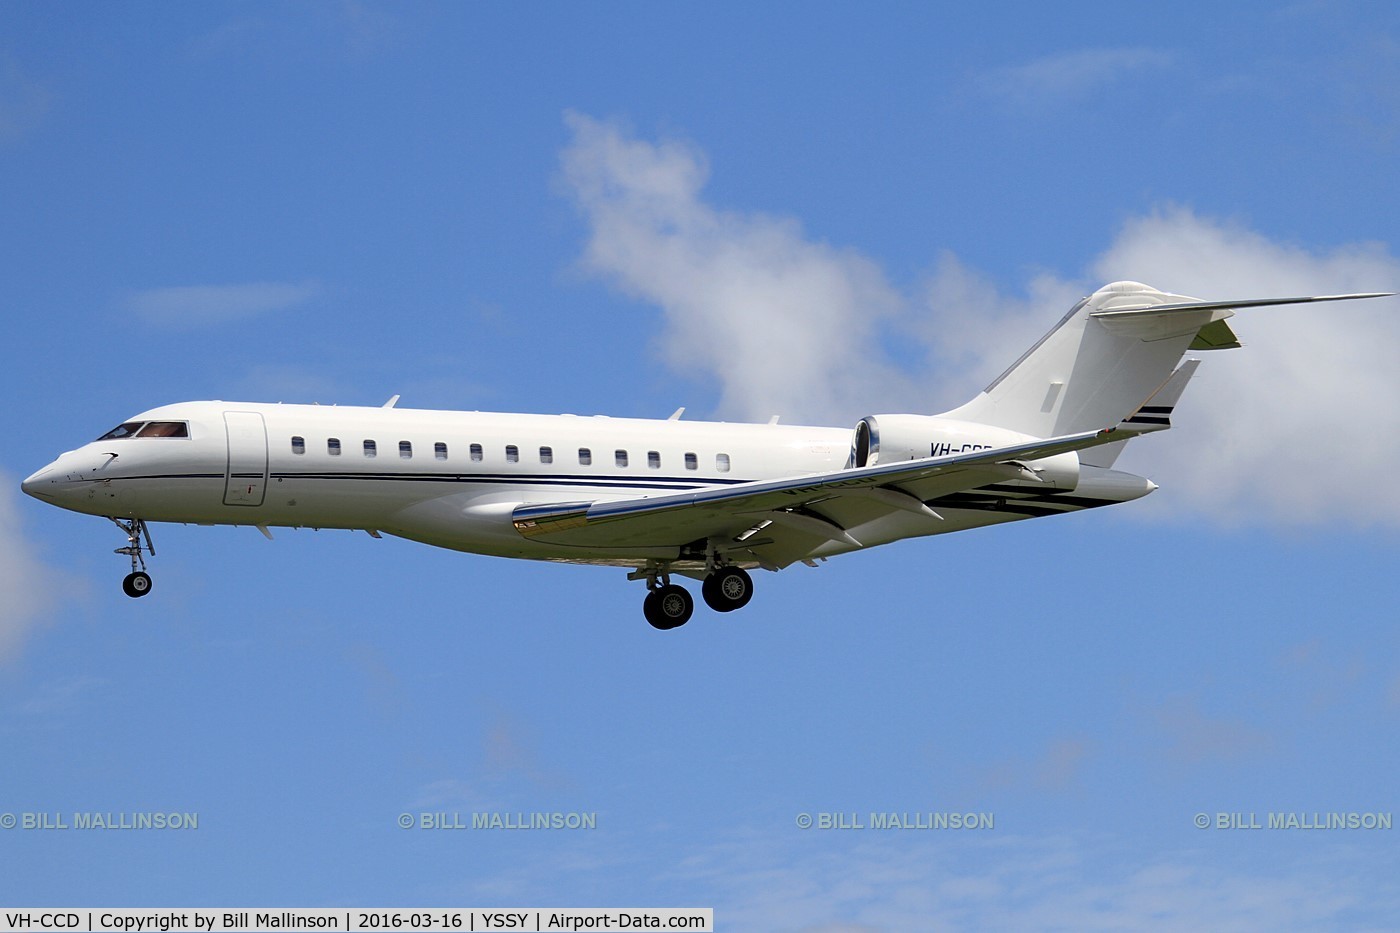 VH-CCD, 2008 Bombardier BD-700-1A10 Global Express XRS C/N 9297, finals to 16R